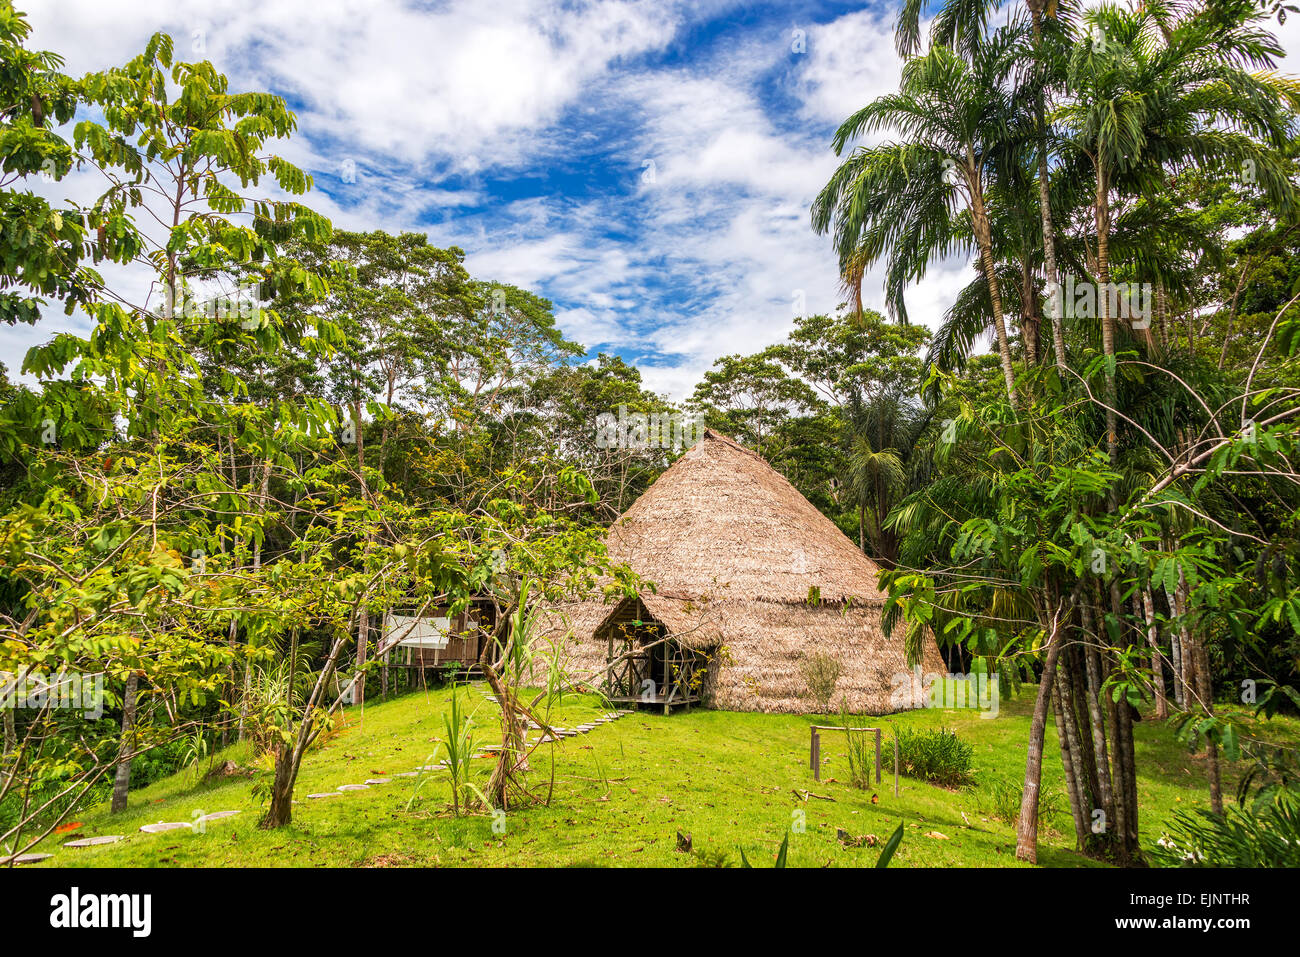 Traditional indigenous dwelling known as a Maloka in the Amazon Rainforest in Brazil Stock Photo